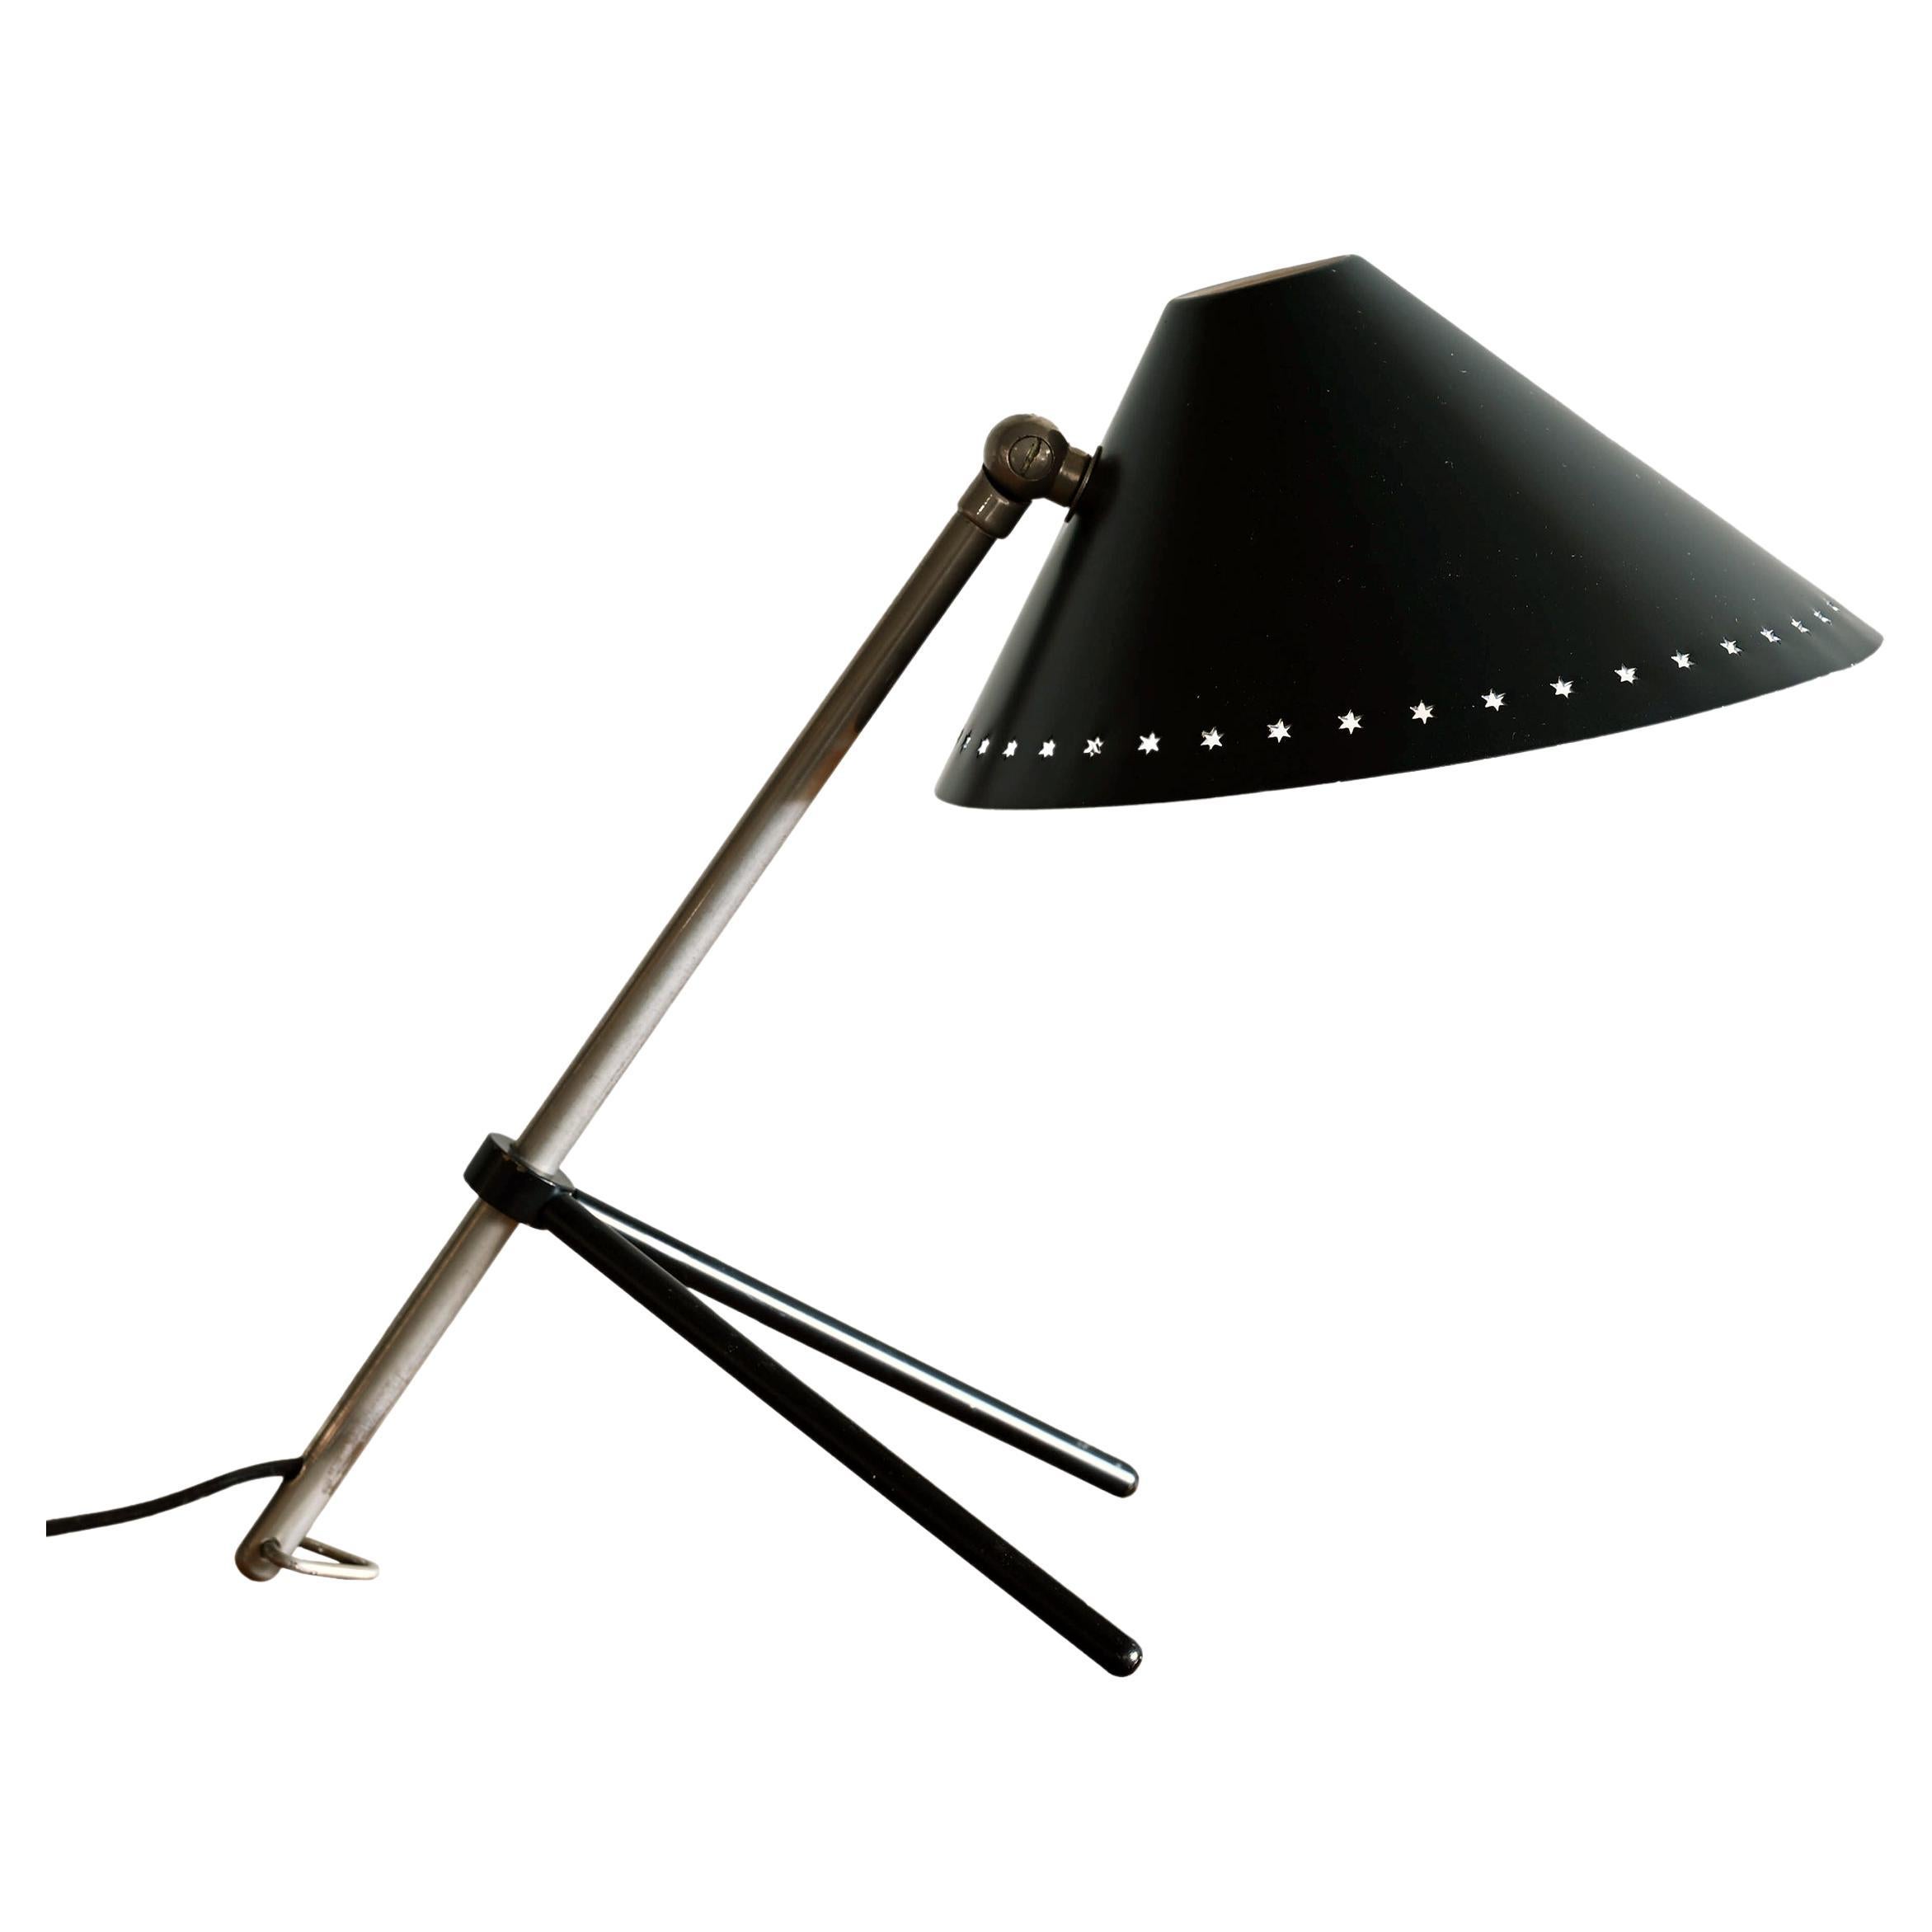 Pinocchio Lamp with black shade by H. Busquet for Hala Zeist, Netherlands